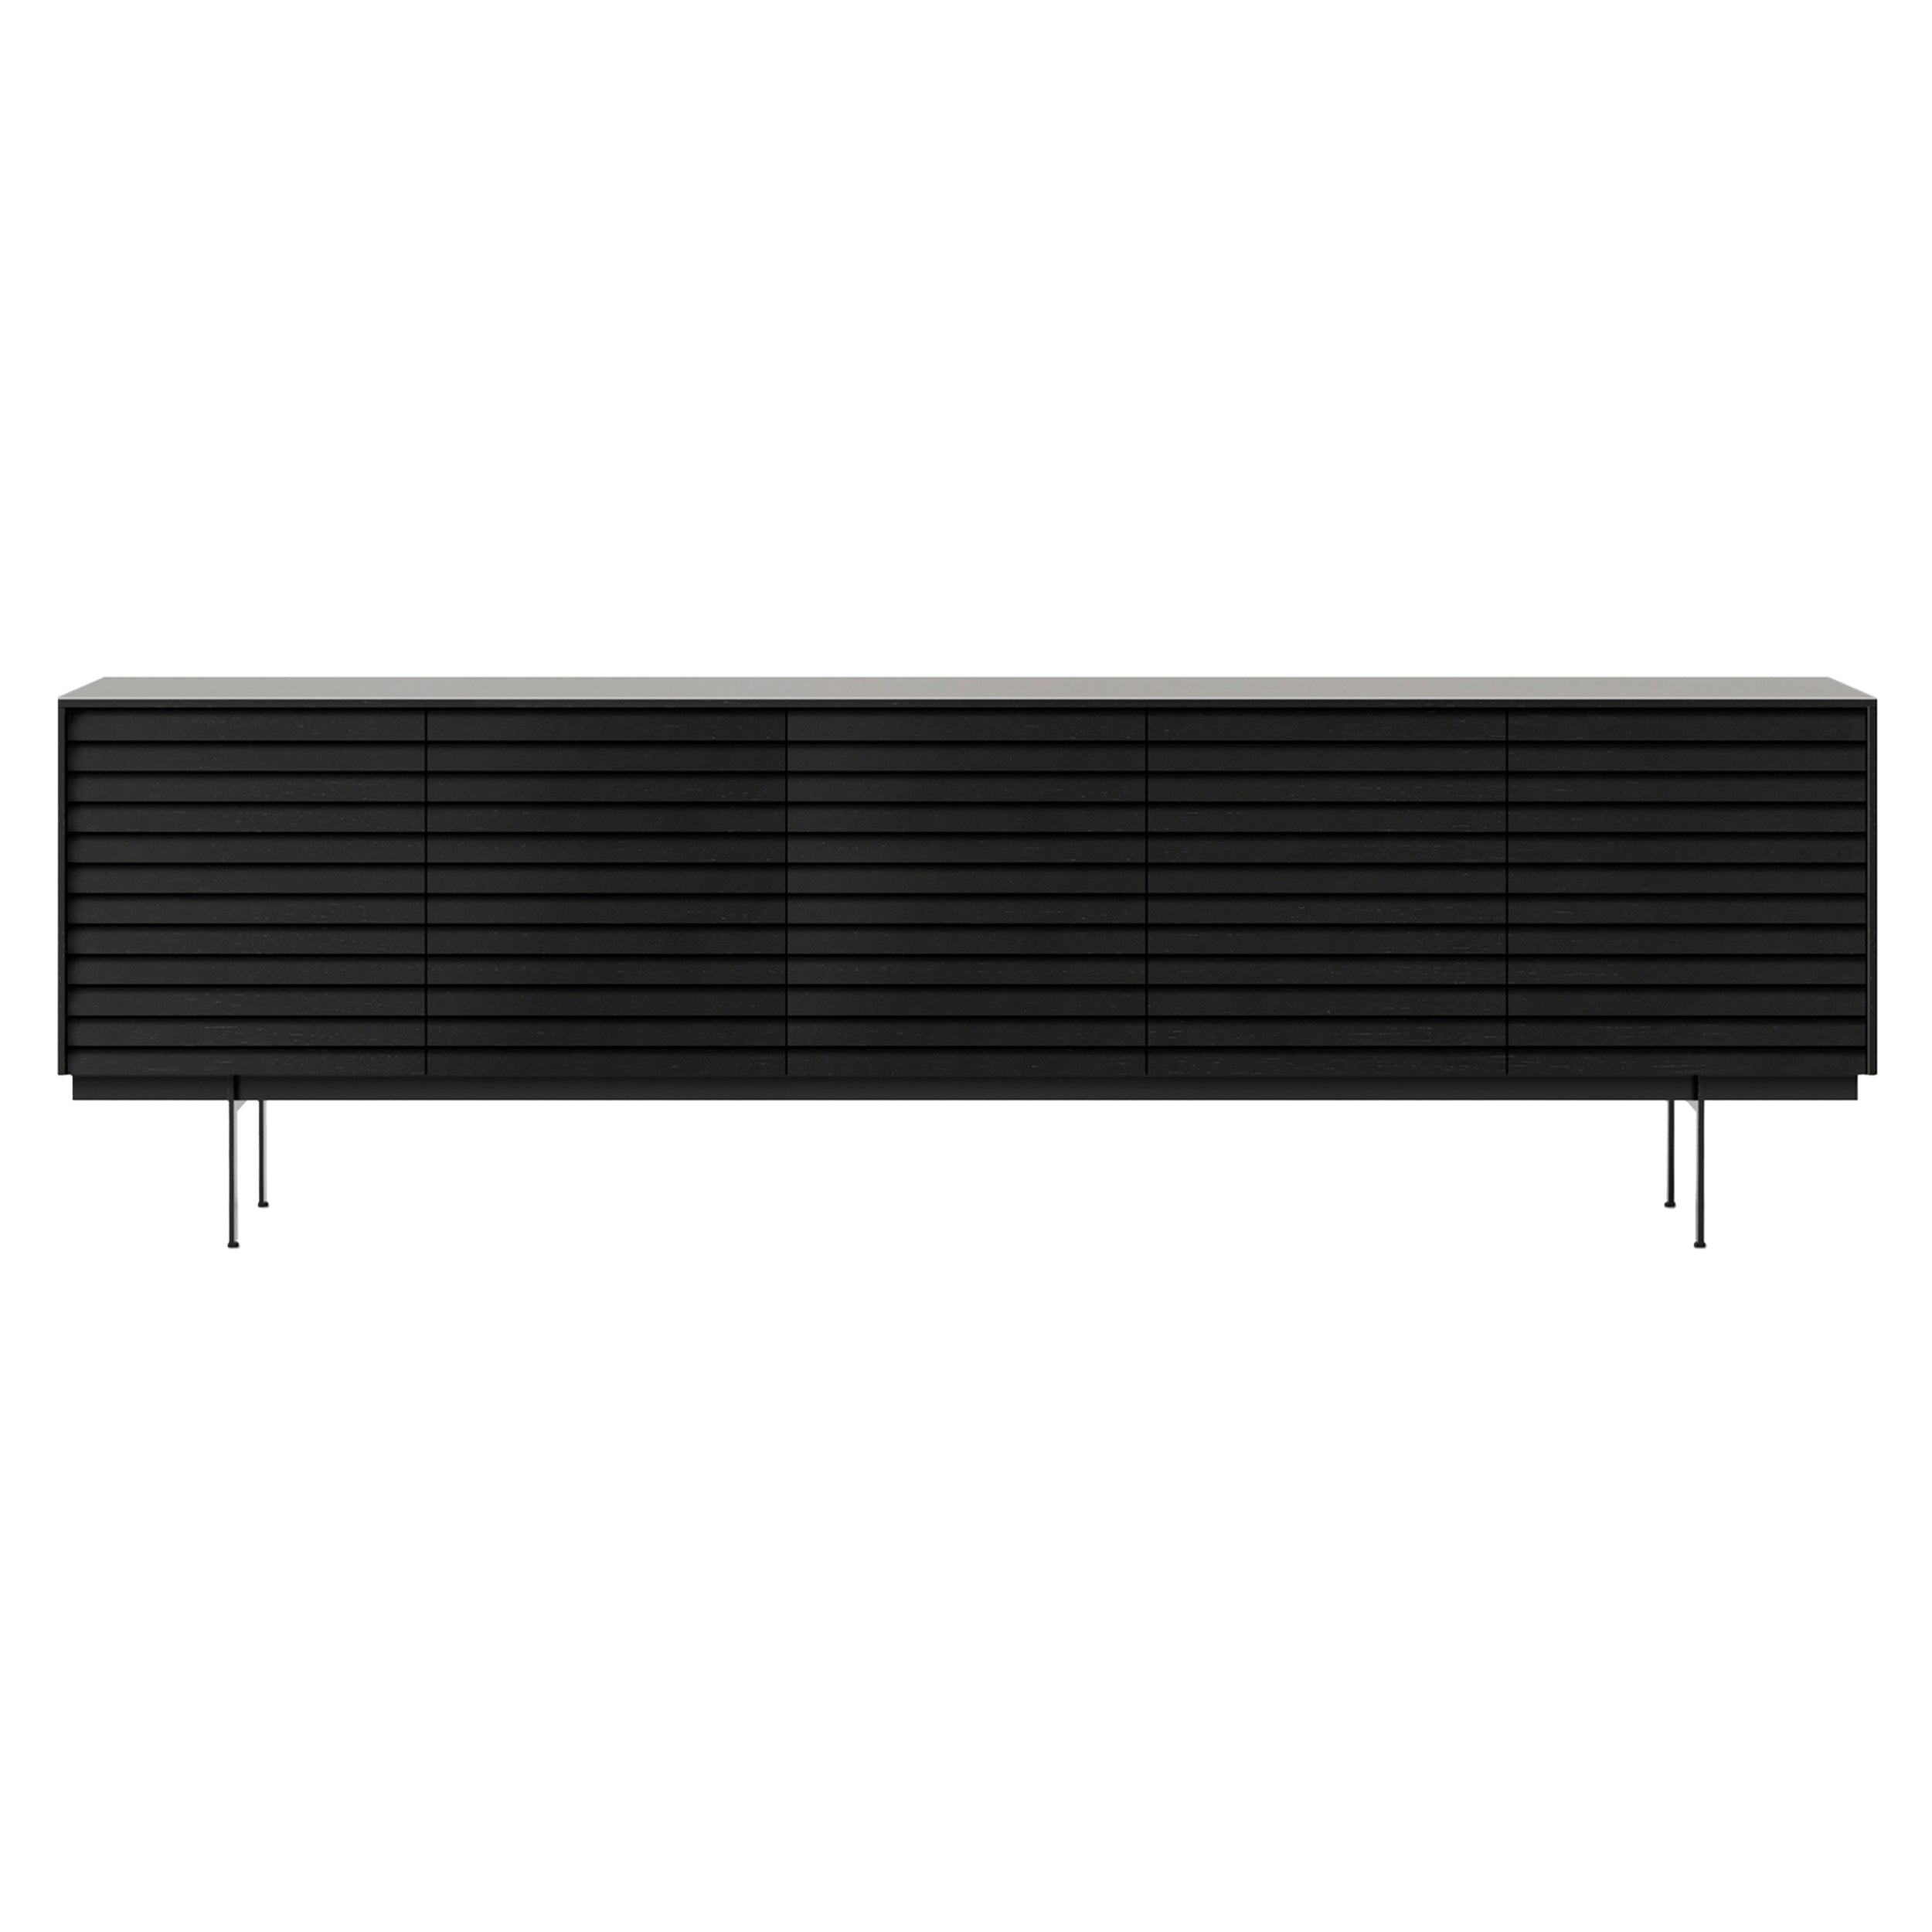 Sussex 12 Sideboard with Drawers: SSX531 + Ebony Stained Oak + Black